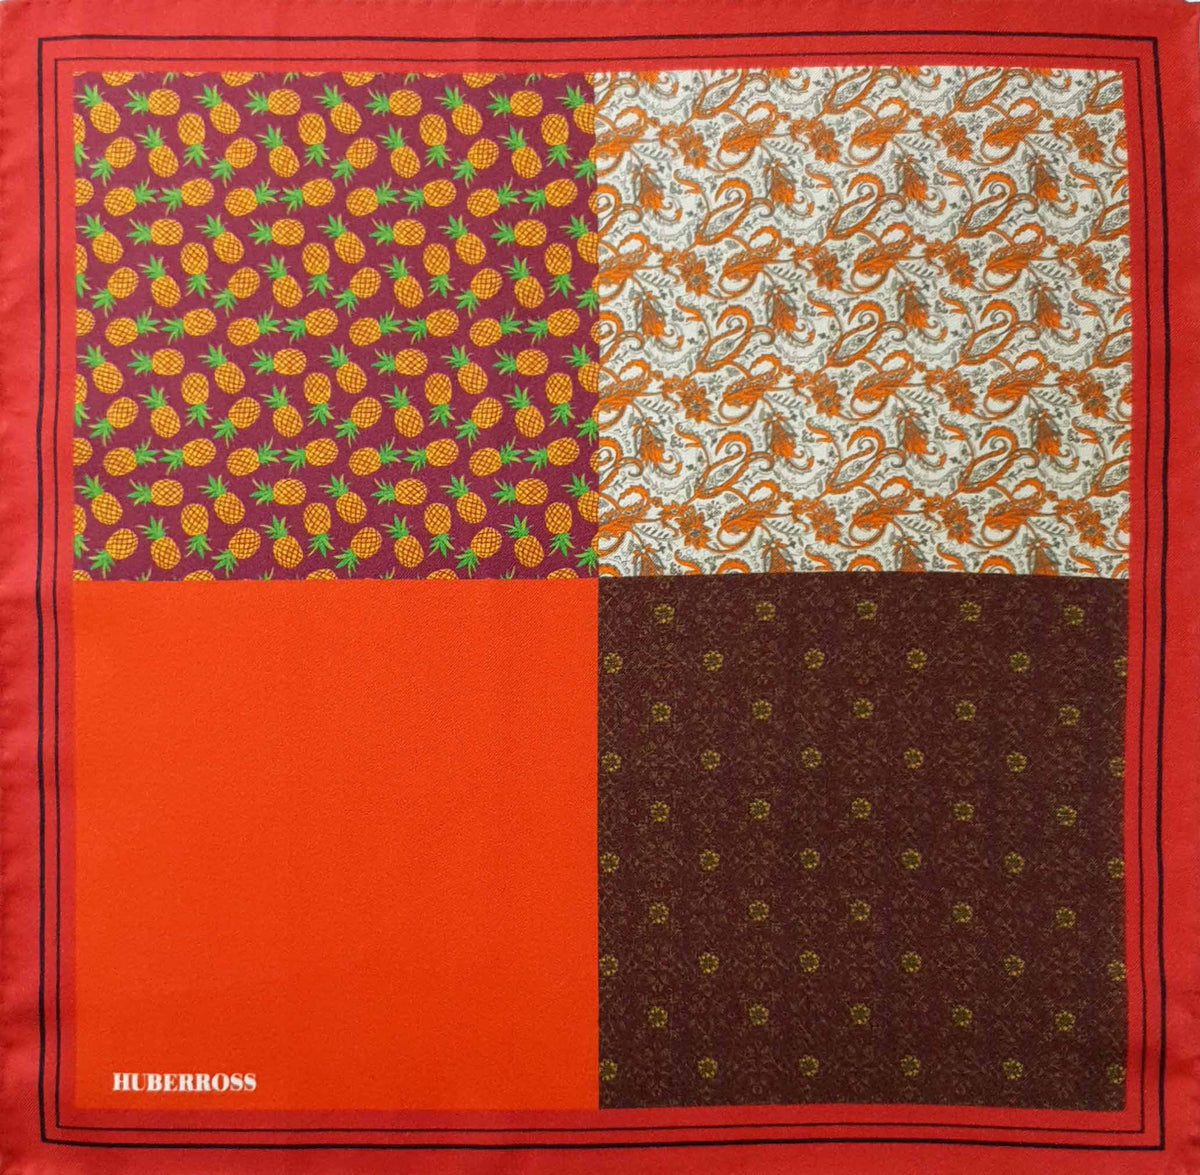 HUBERROSS Glory Amber 100% Silk Hand Rolled Pocket Square PS125